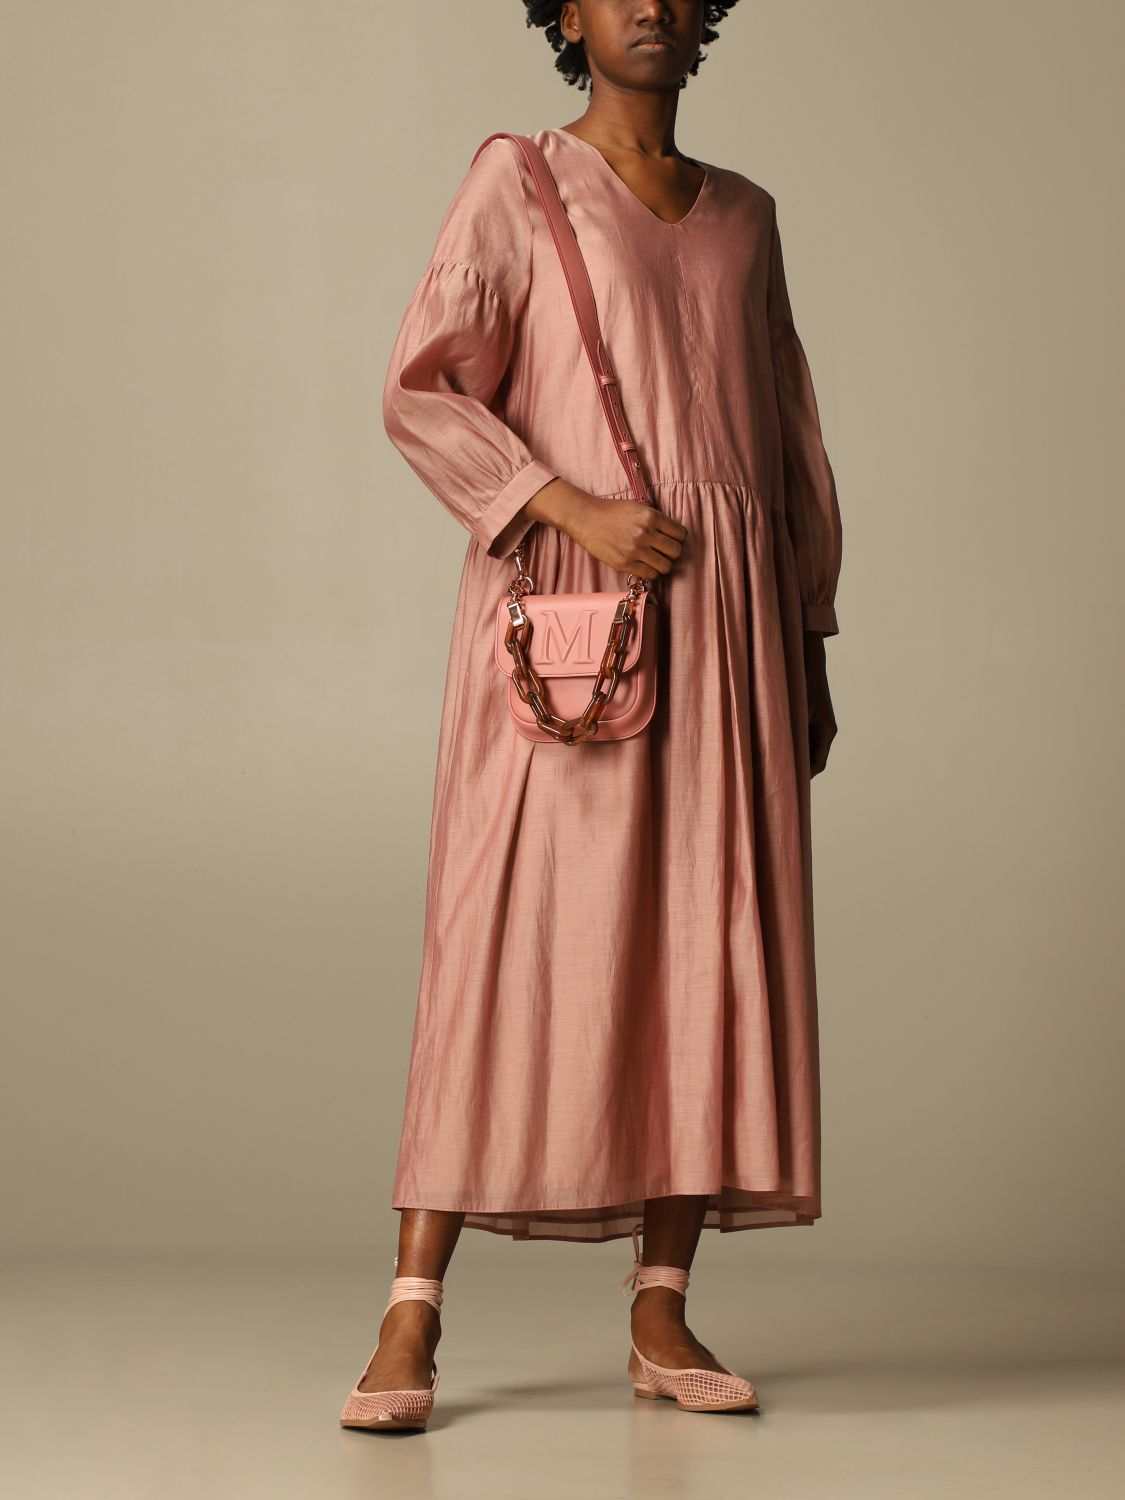 S Max Mara Outlet: long dress in cotton and silk voile - Blush Pink